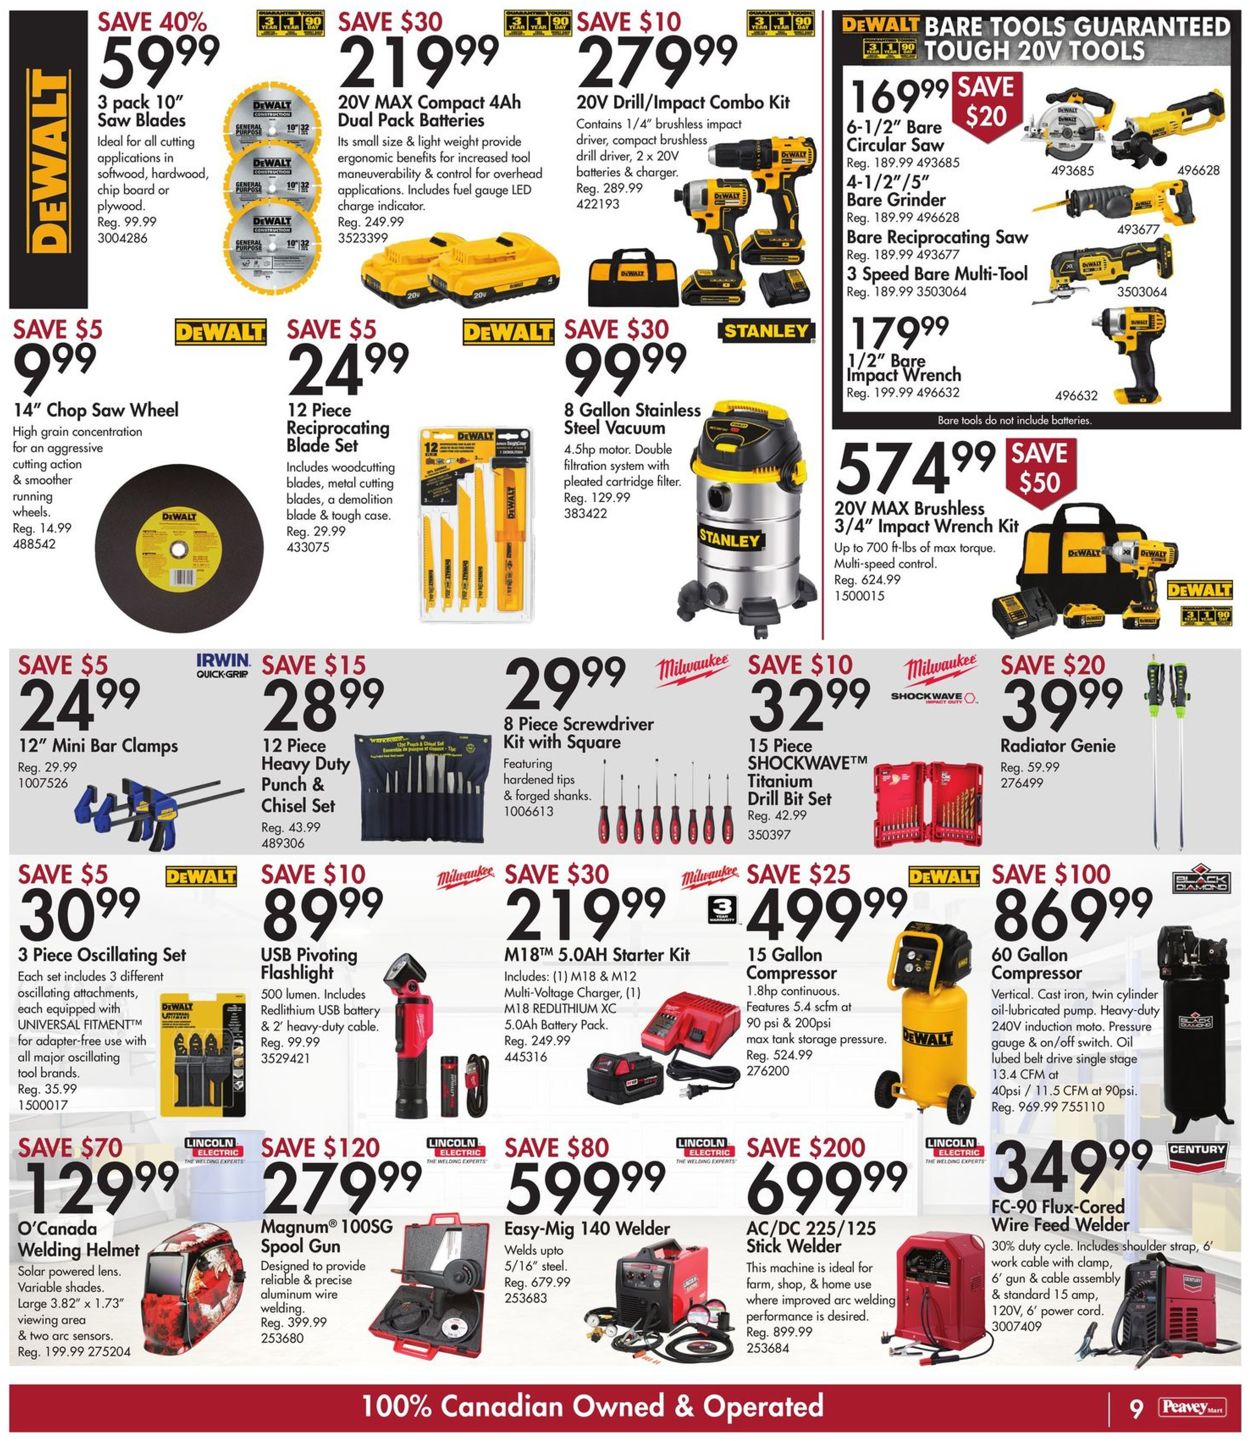 Peavey Mart Flyer from 01/21/2022